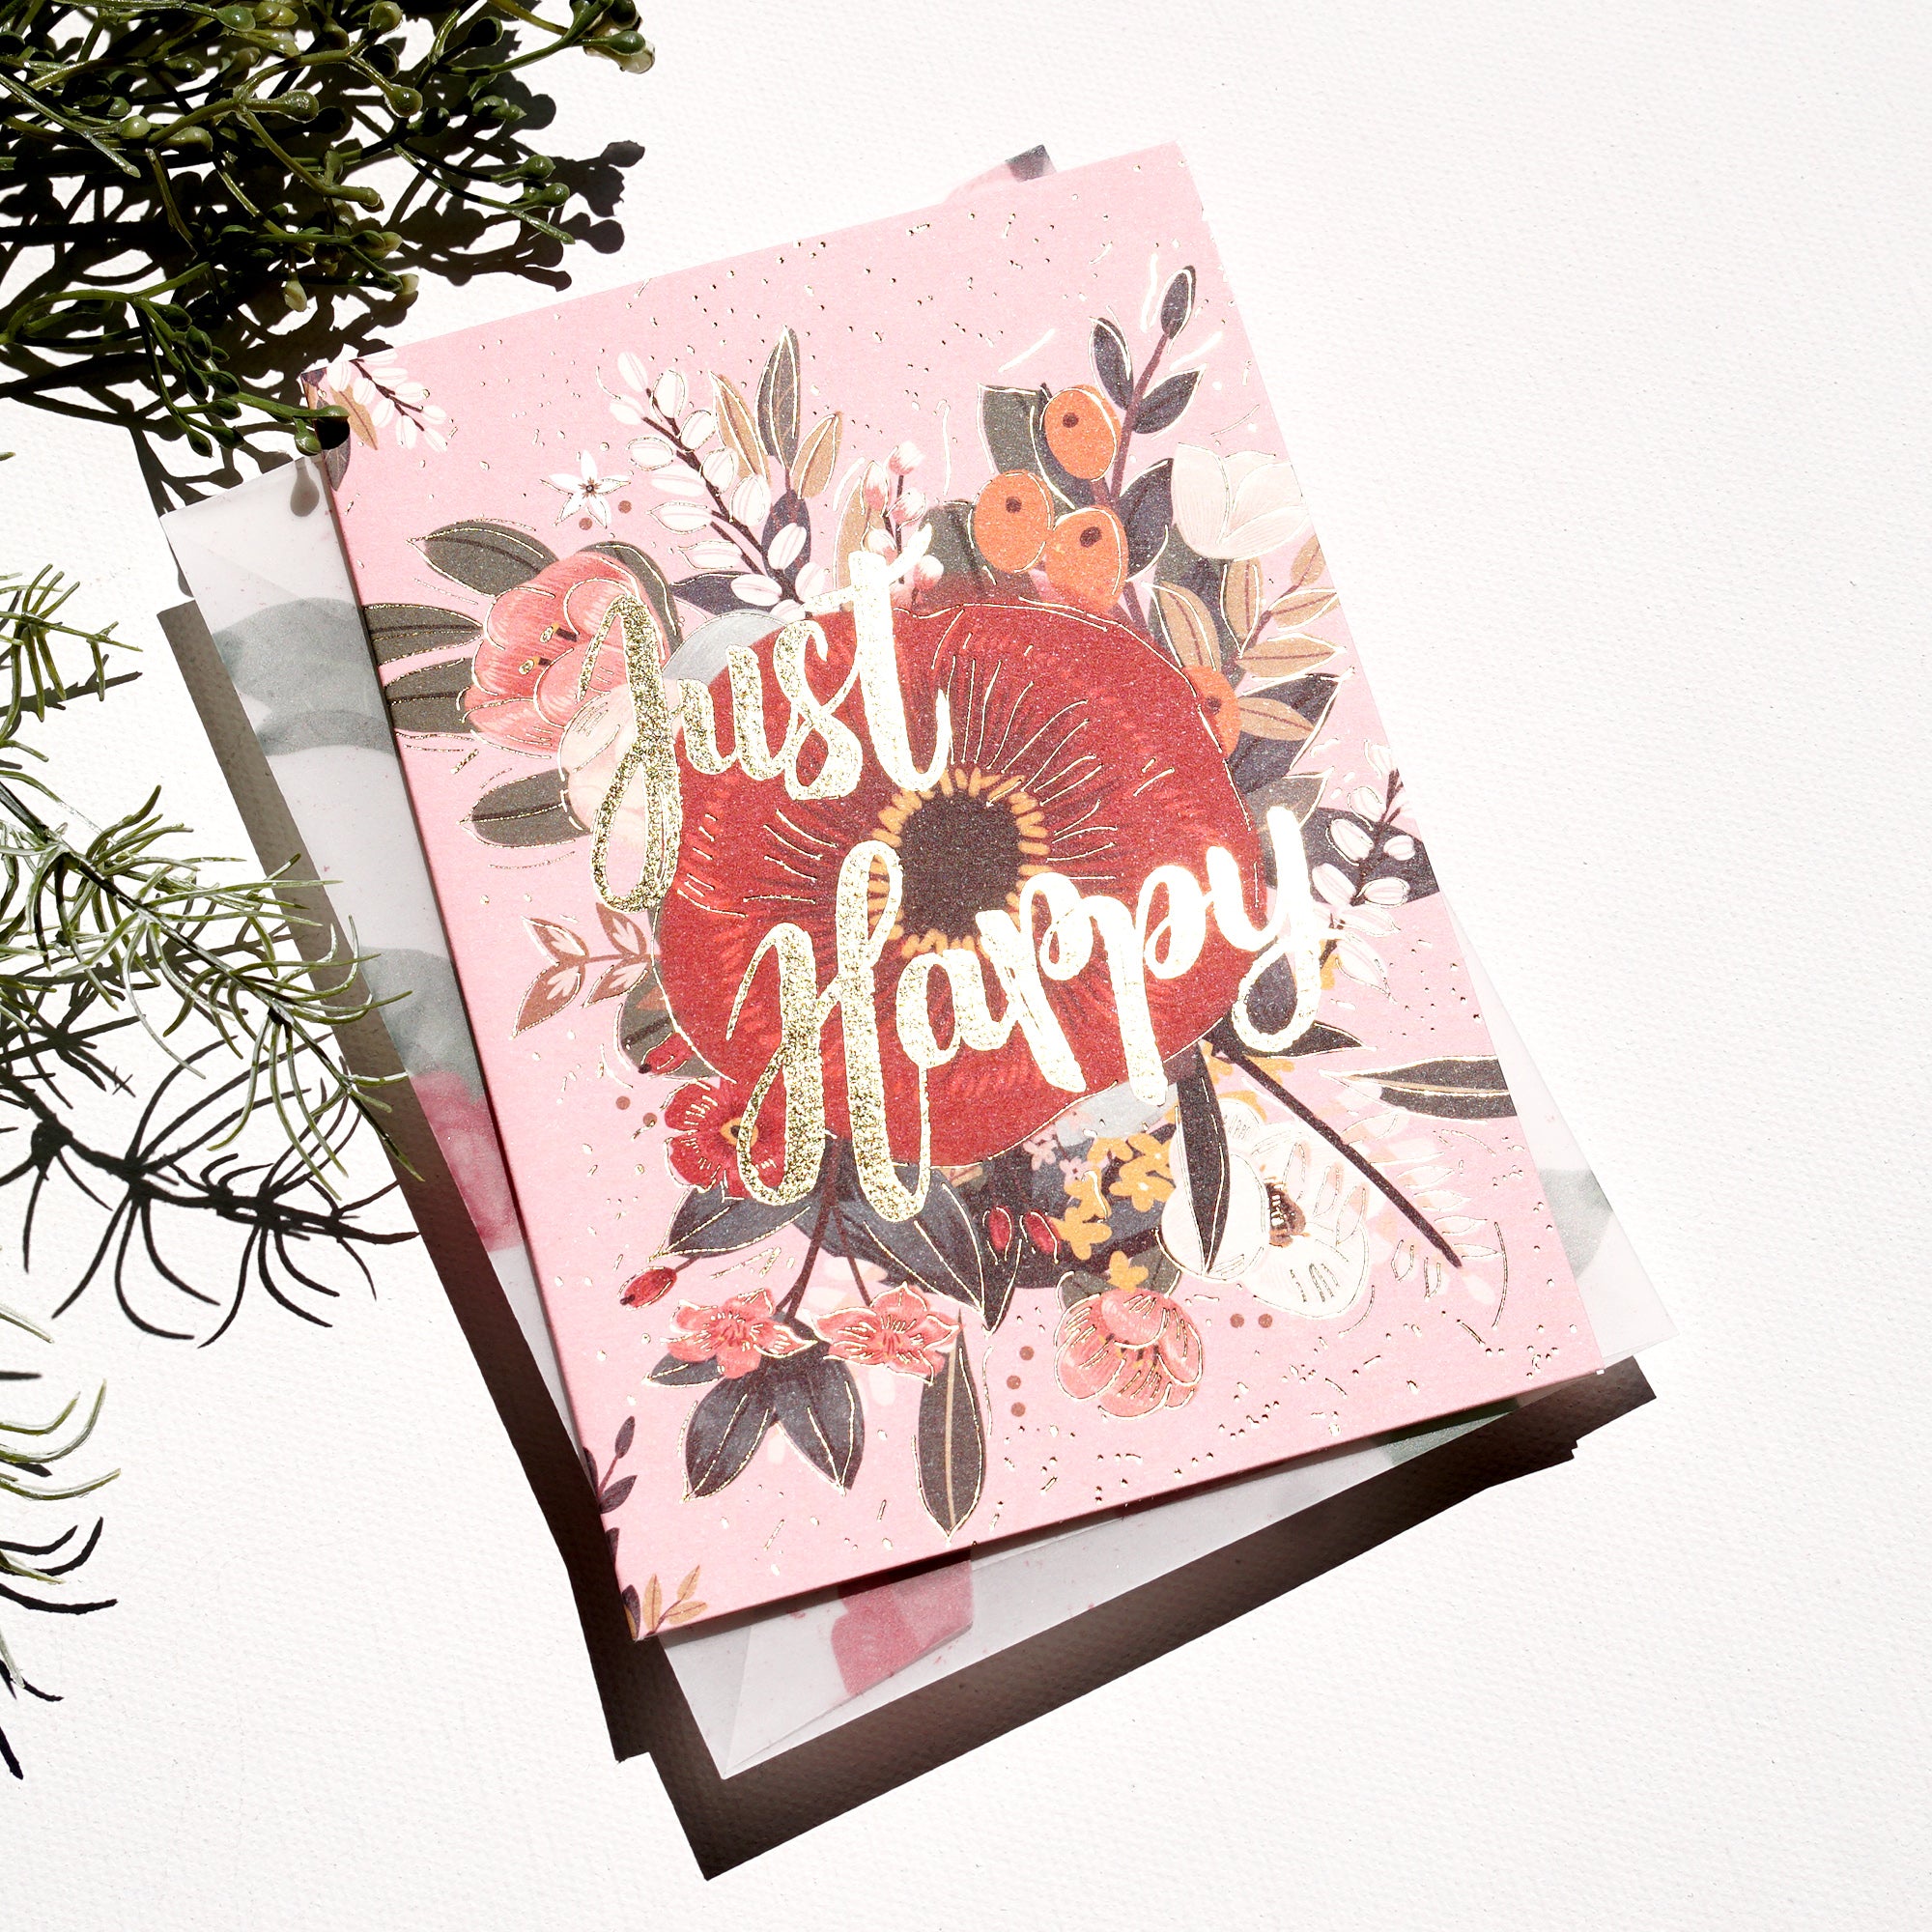 Greeting Cards - Just Happy